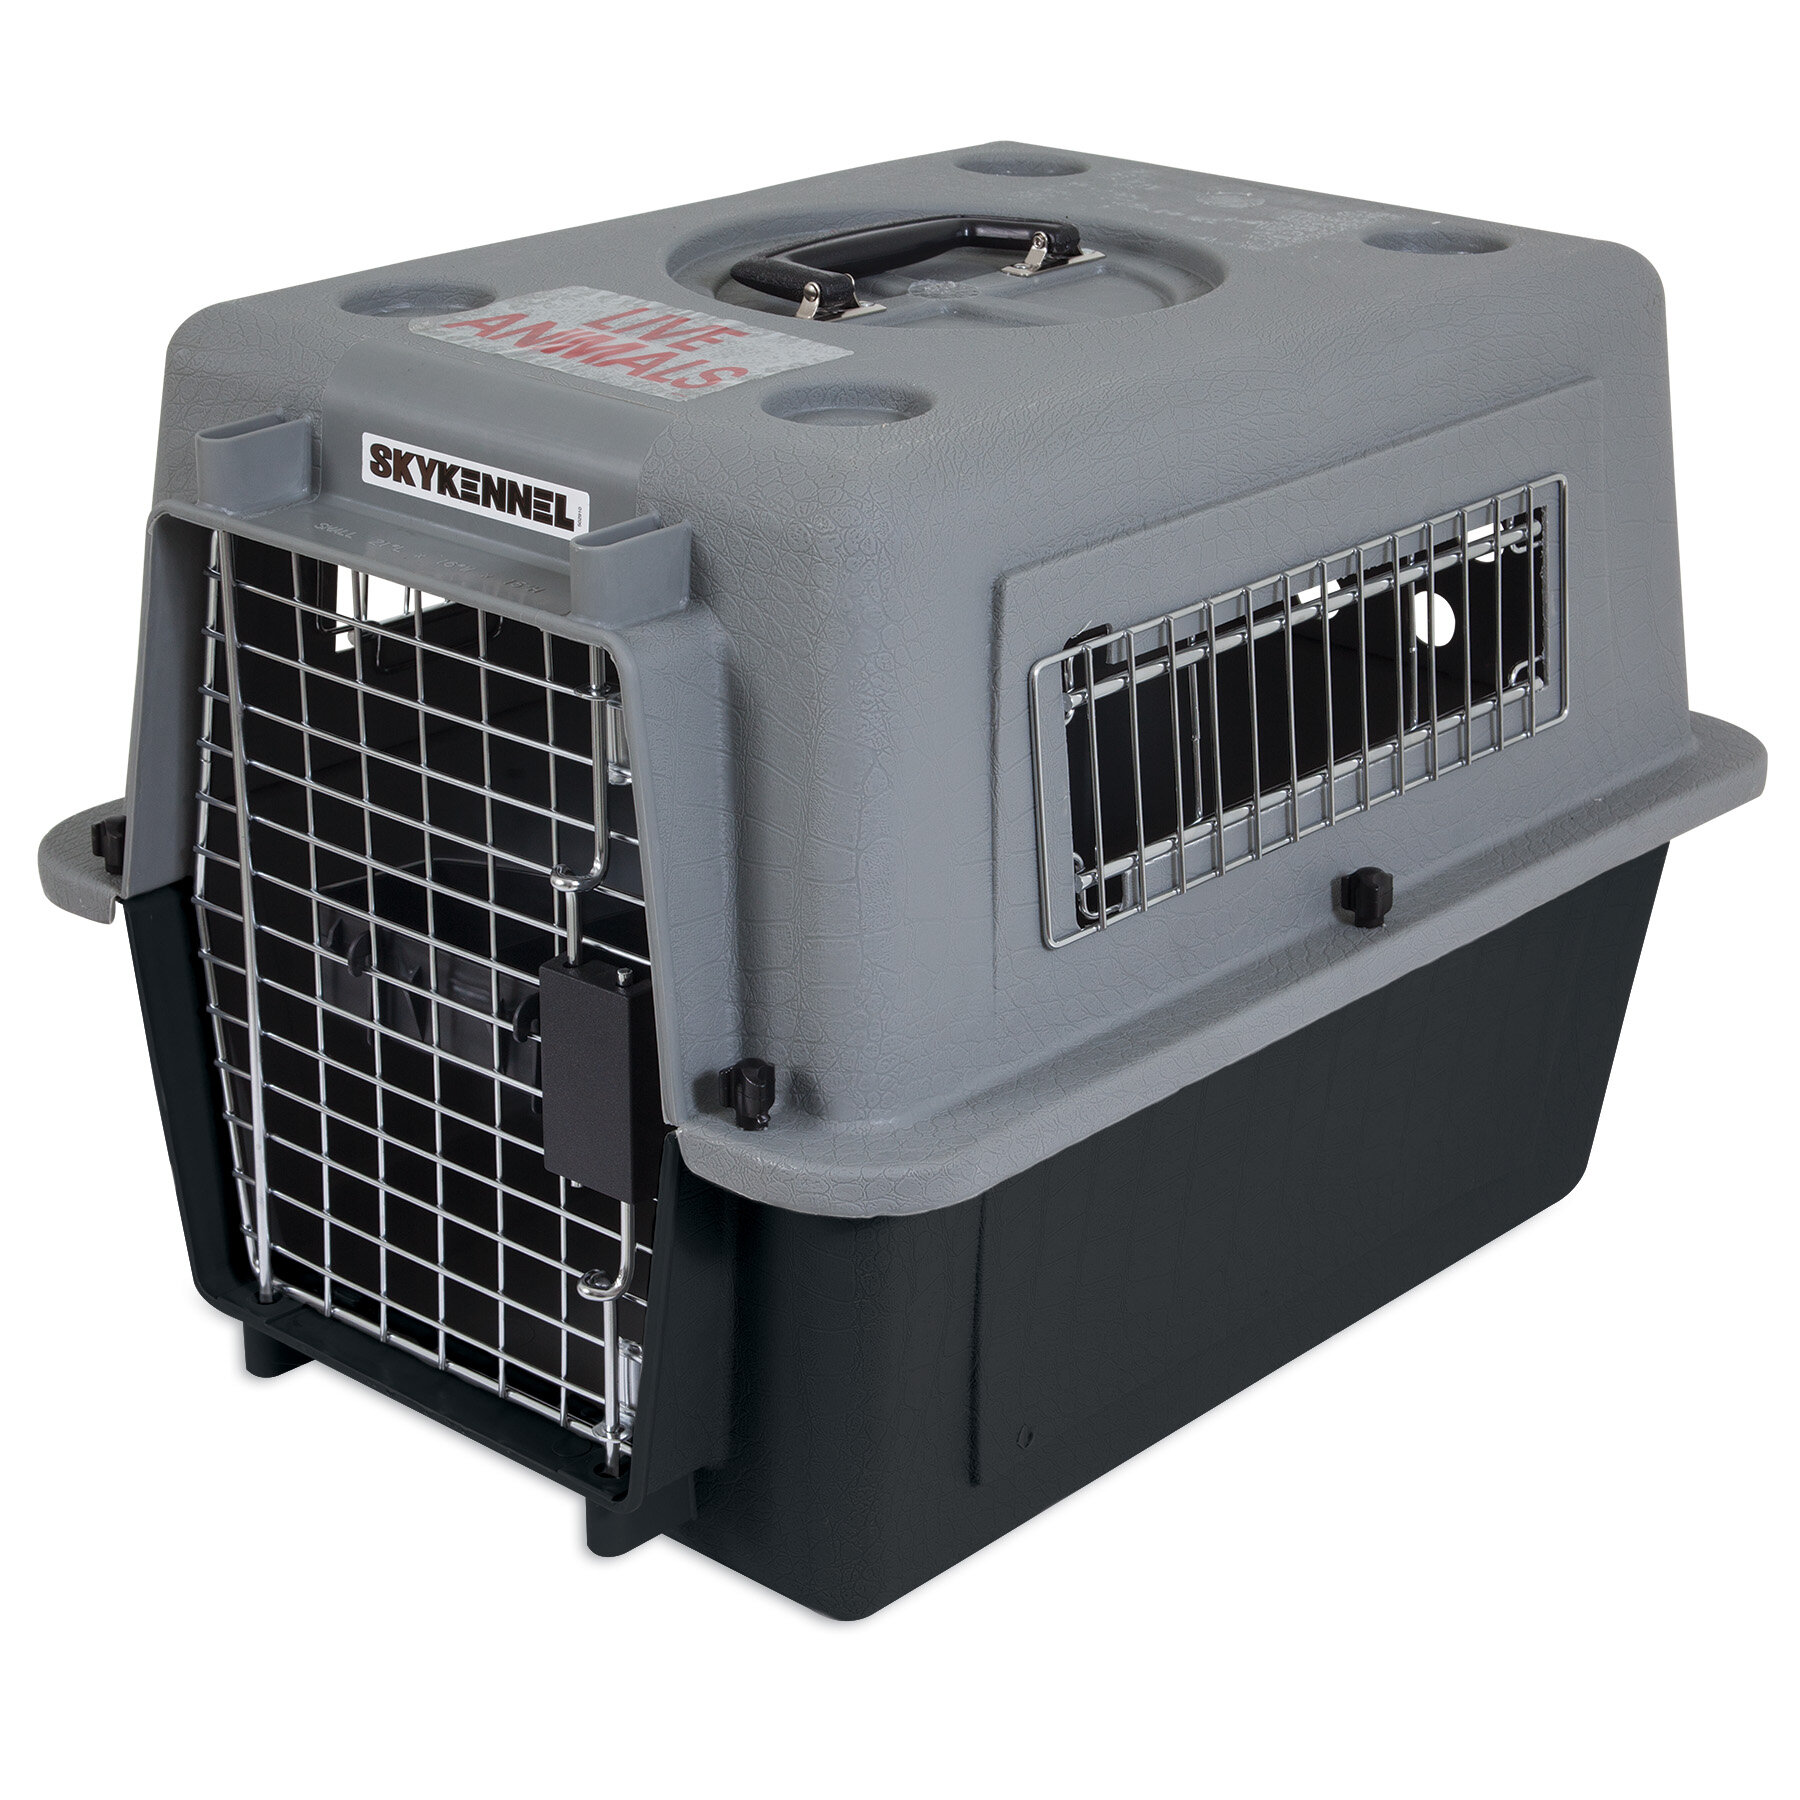 Pet Carrier And Crate 27 - Premium Foldable Design - 360 Degree  Ventilation And Hard Plastic Wall Protection